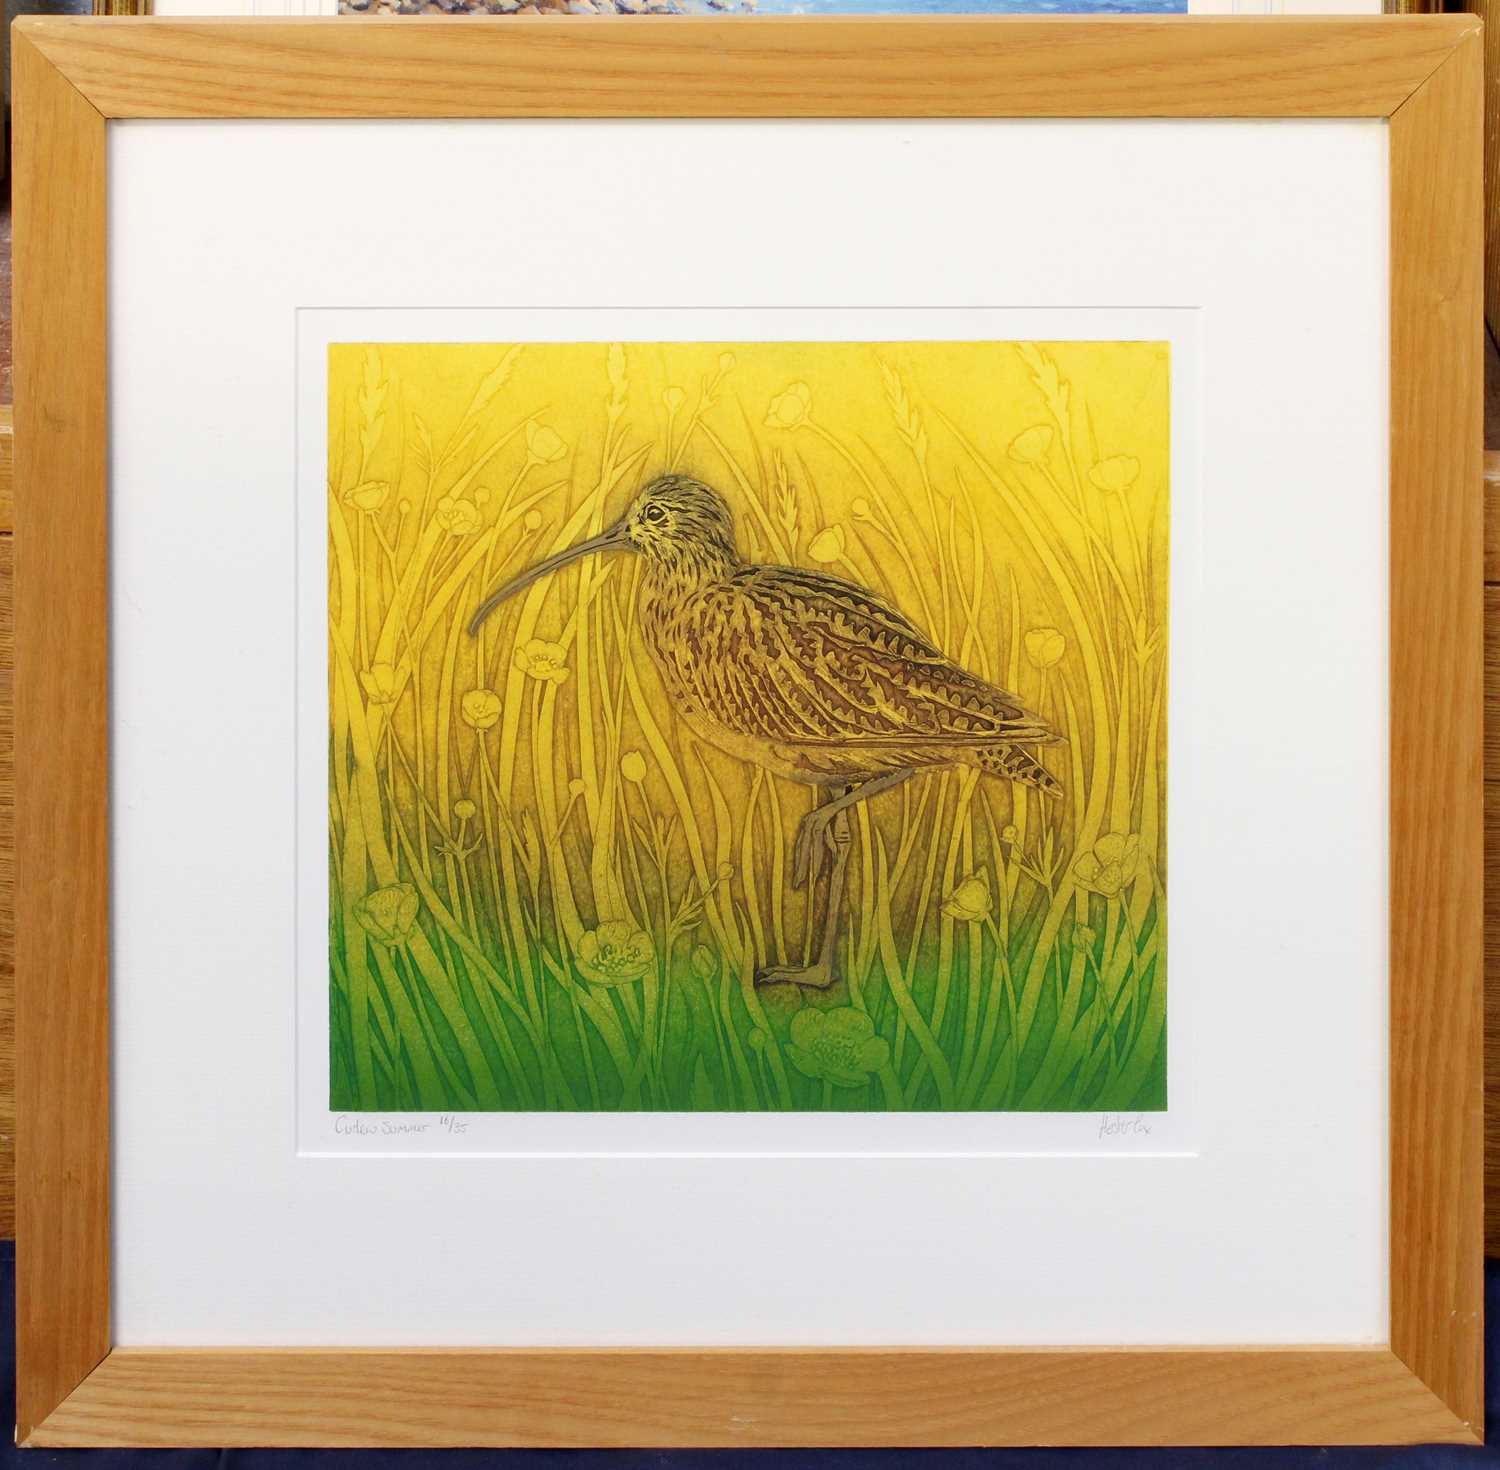 Hester Cox (Contemporary) "Curlew Summer" Limited edition collagraph print, signed and numbered 16/ - Image 4 of 6